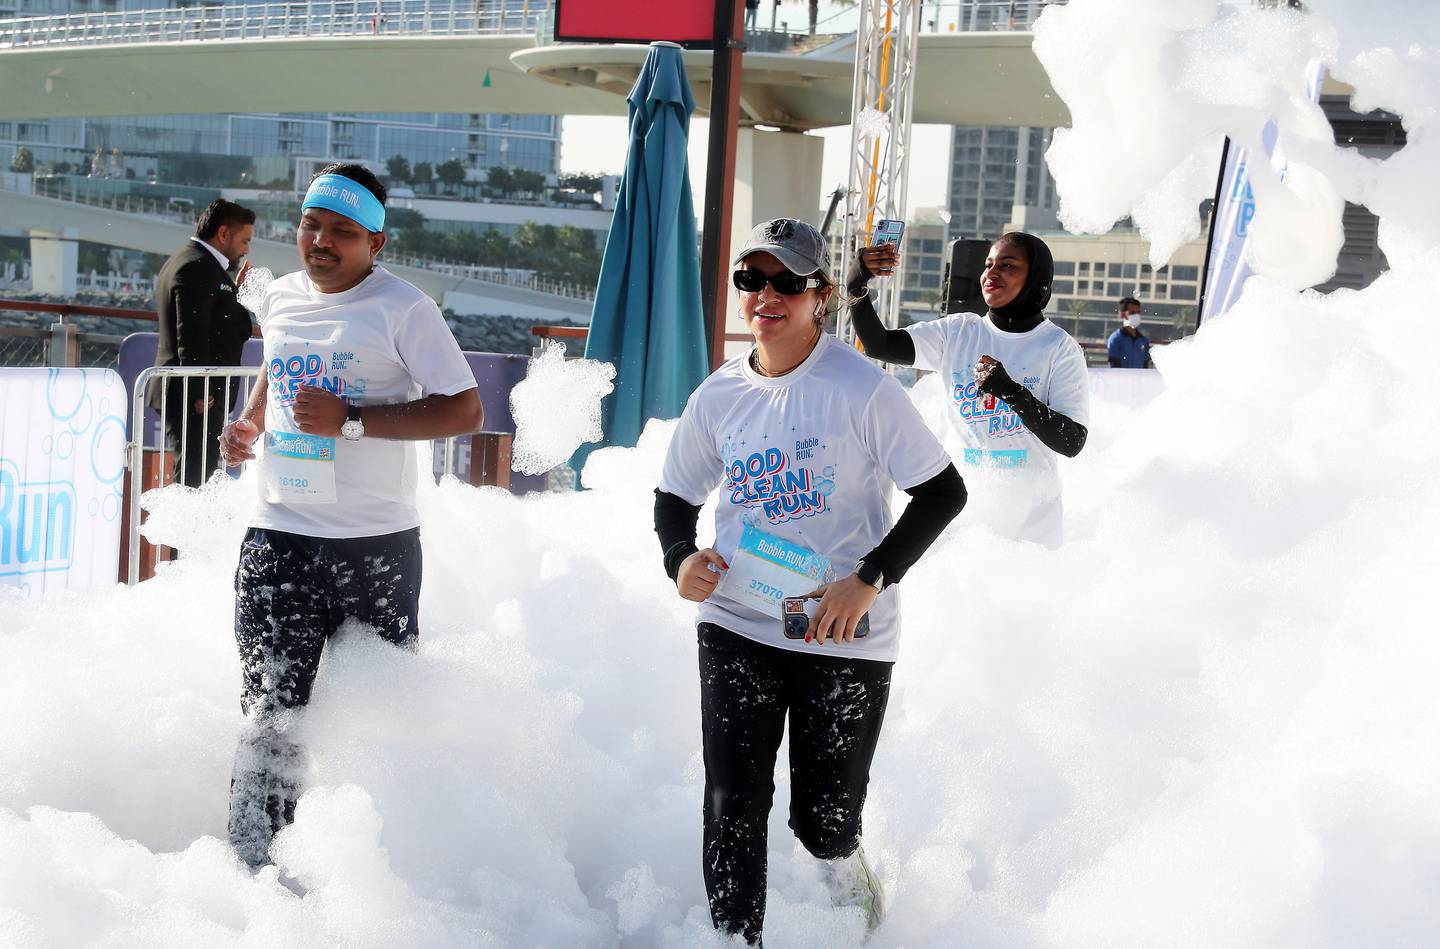 Participants take part in Bubble Run on Bluewaters Island, Dubai. Pawan Singh / The National